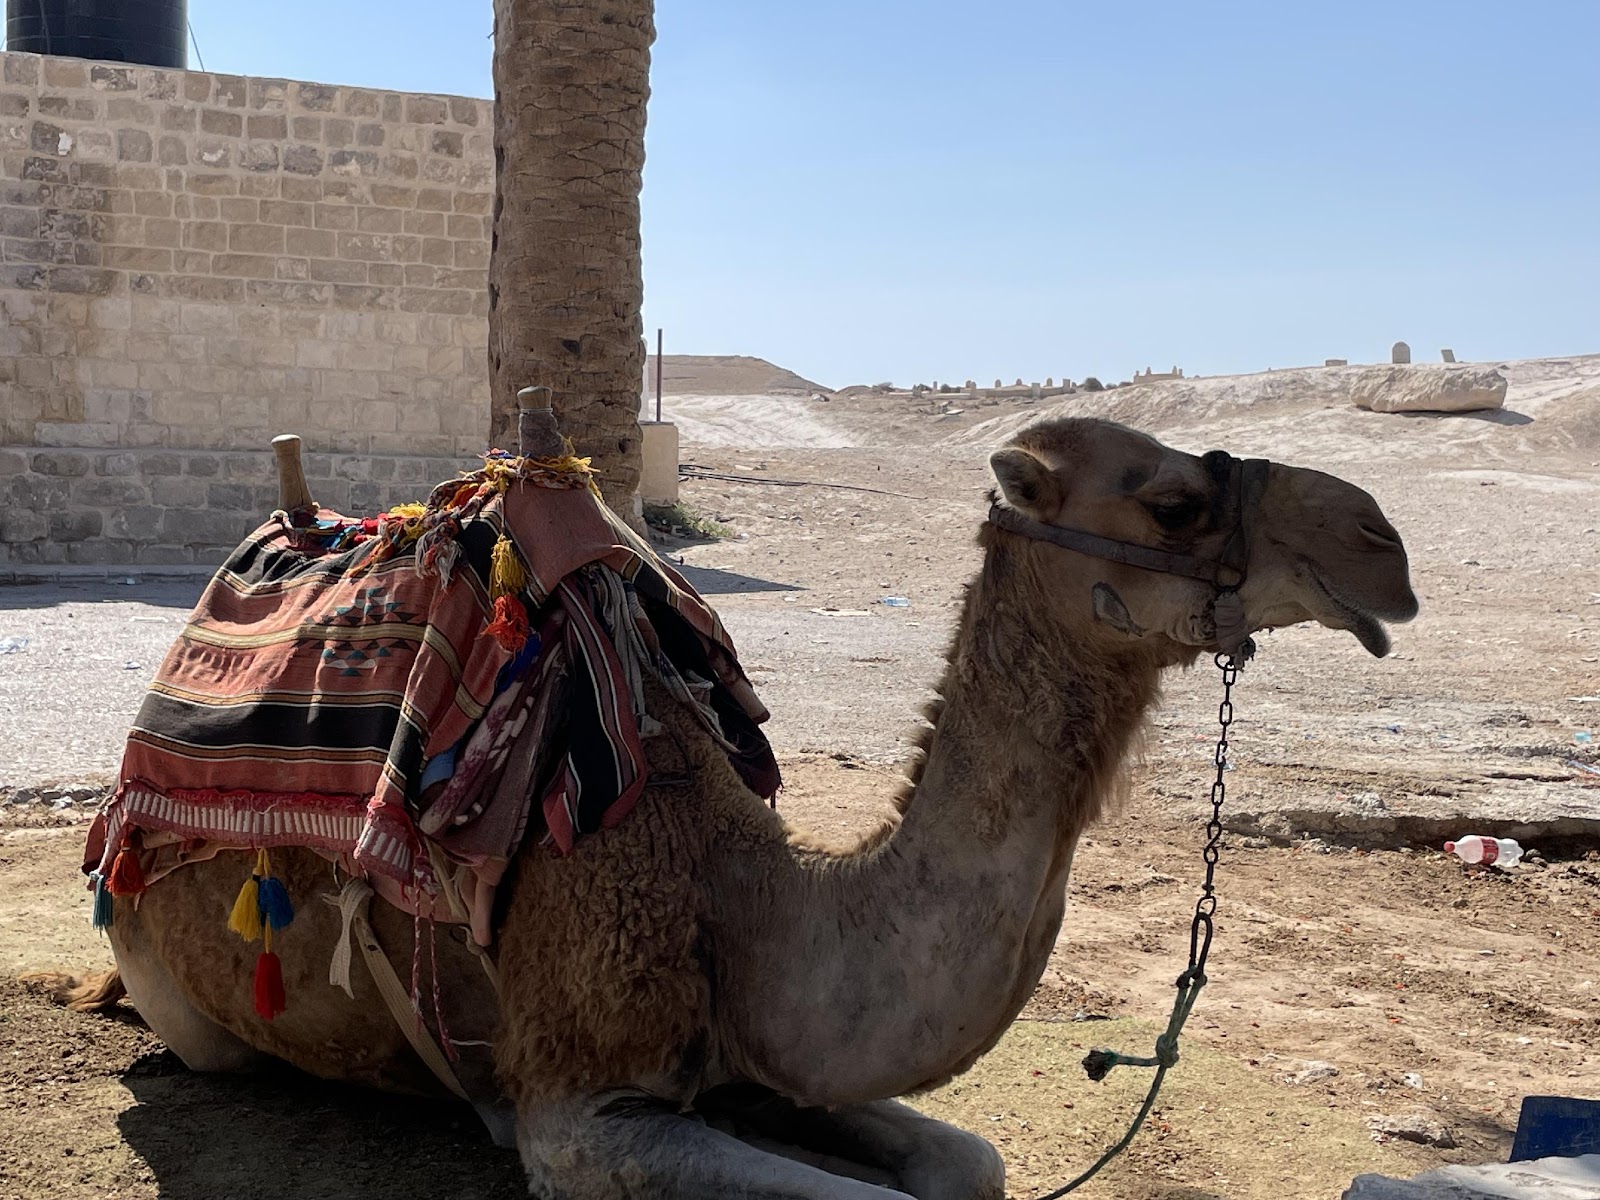 A camel with a blanket on its back

Description automatically generated